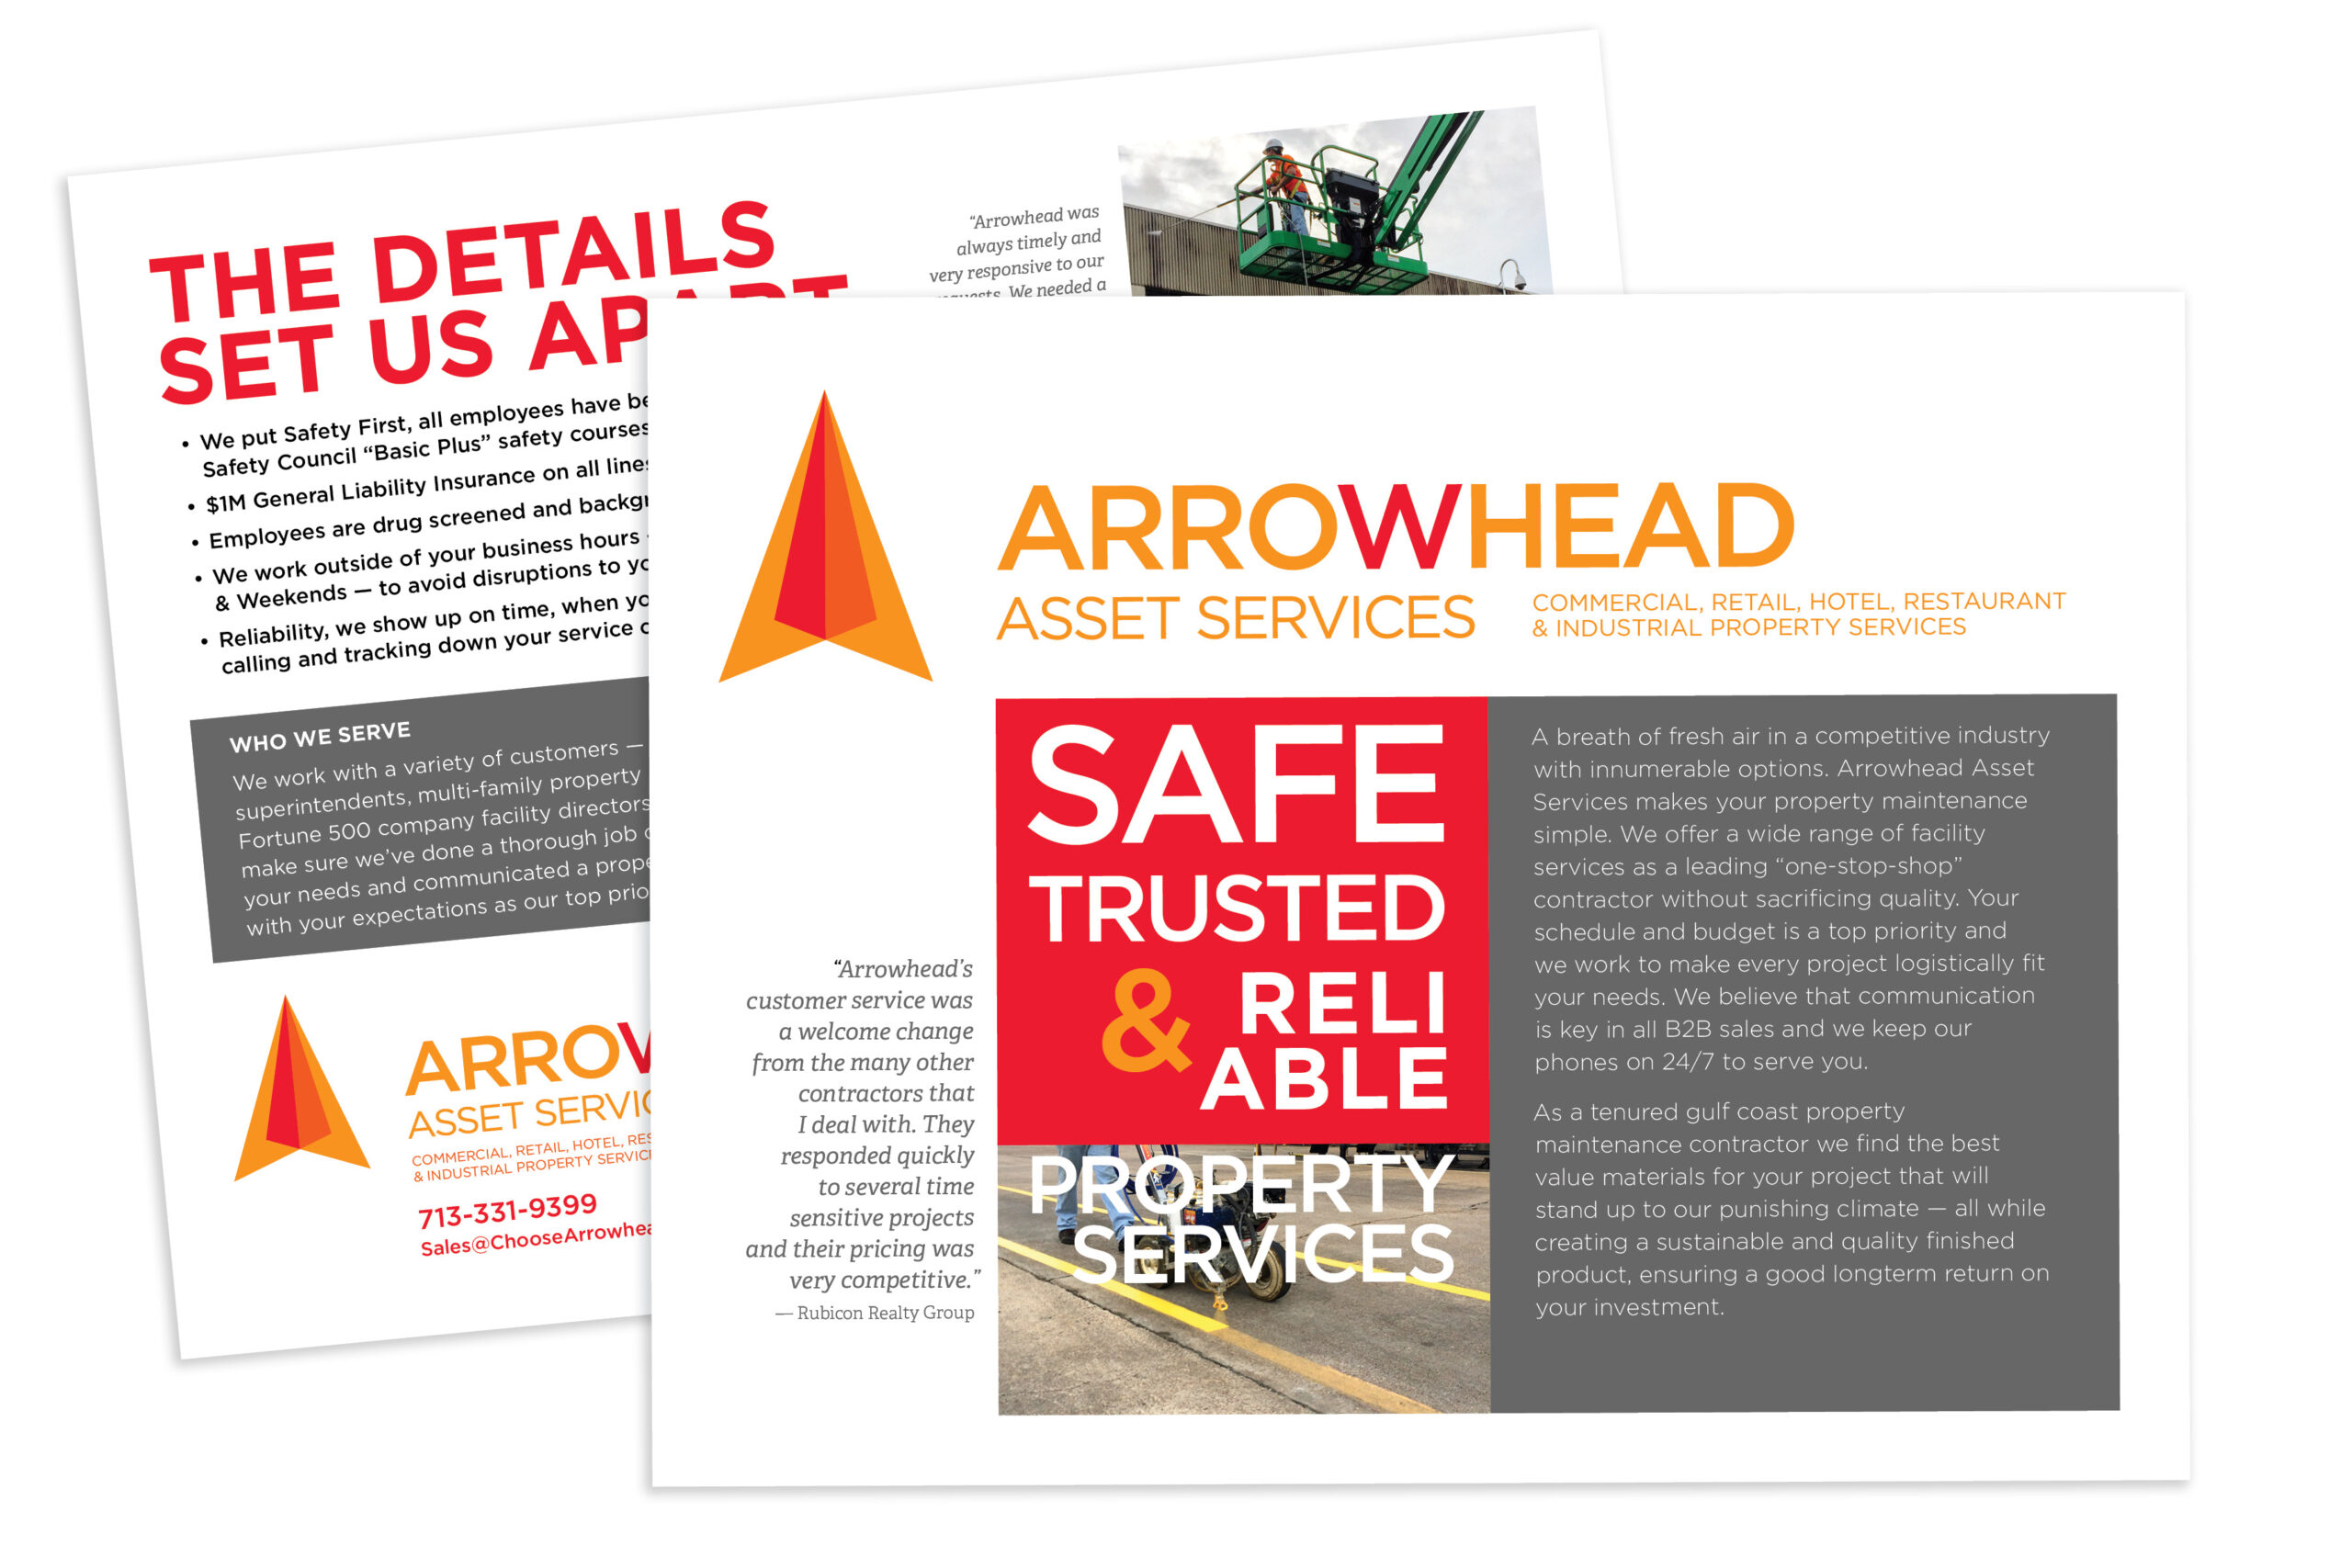 arrowhead asset services collateral